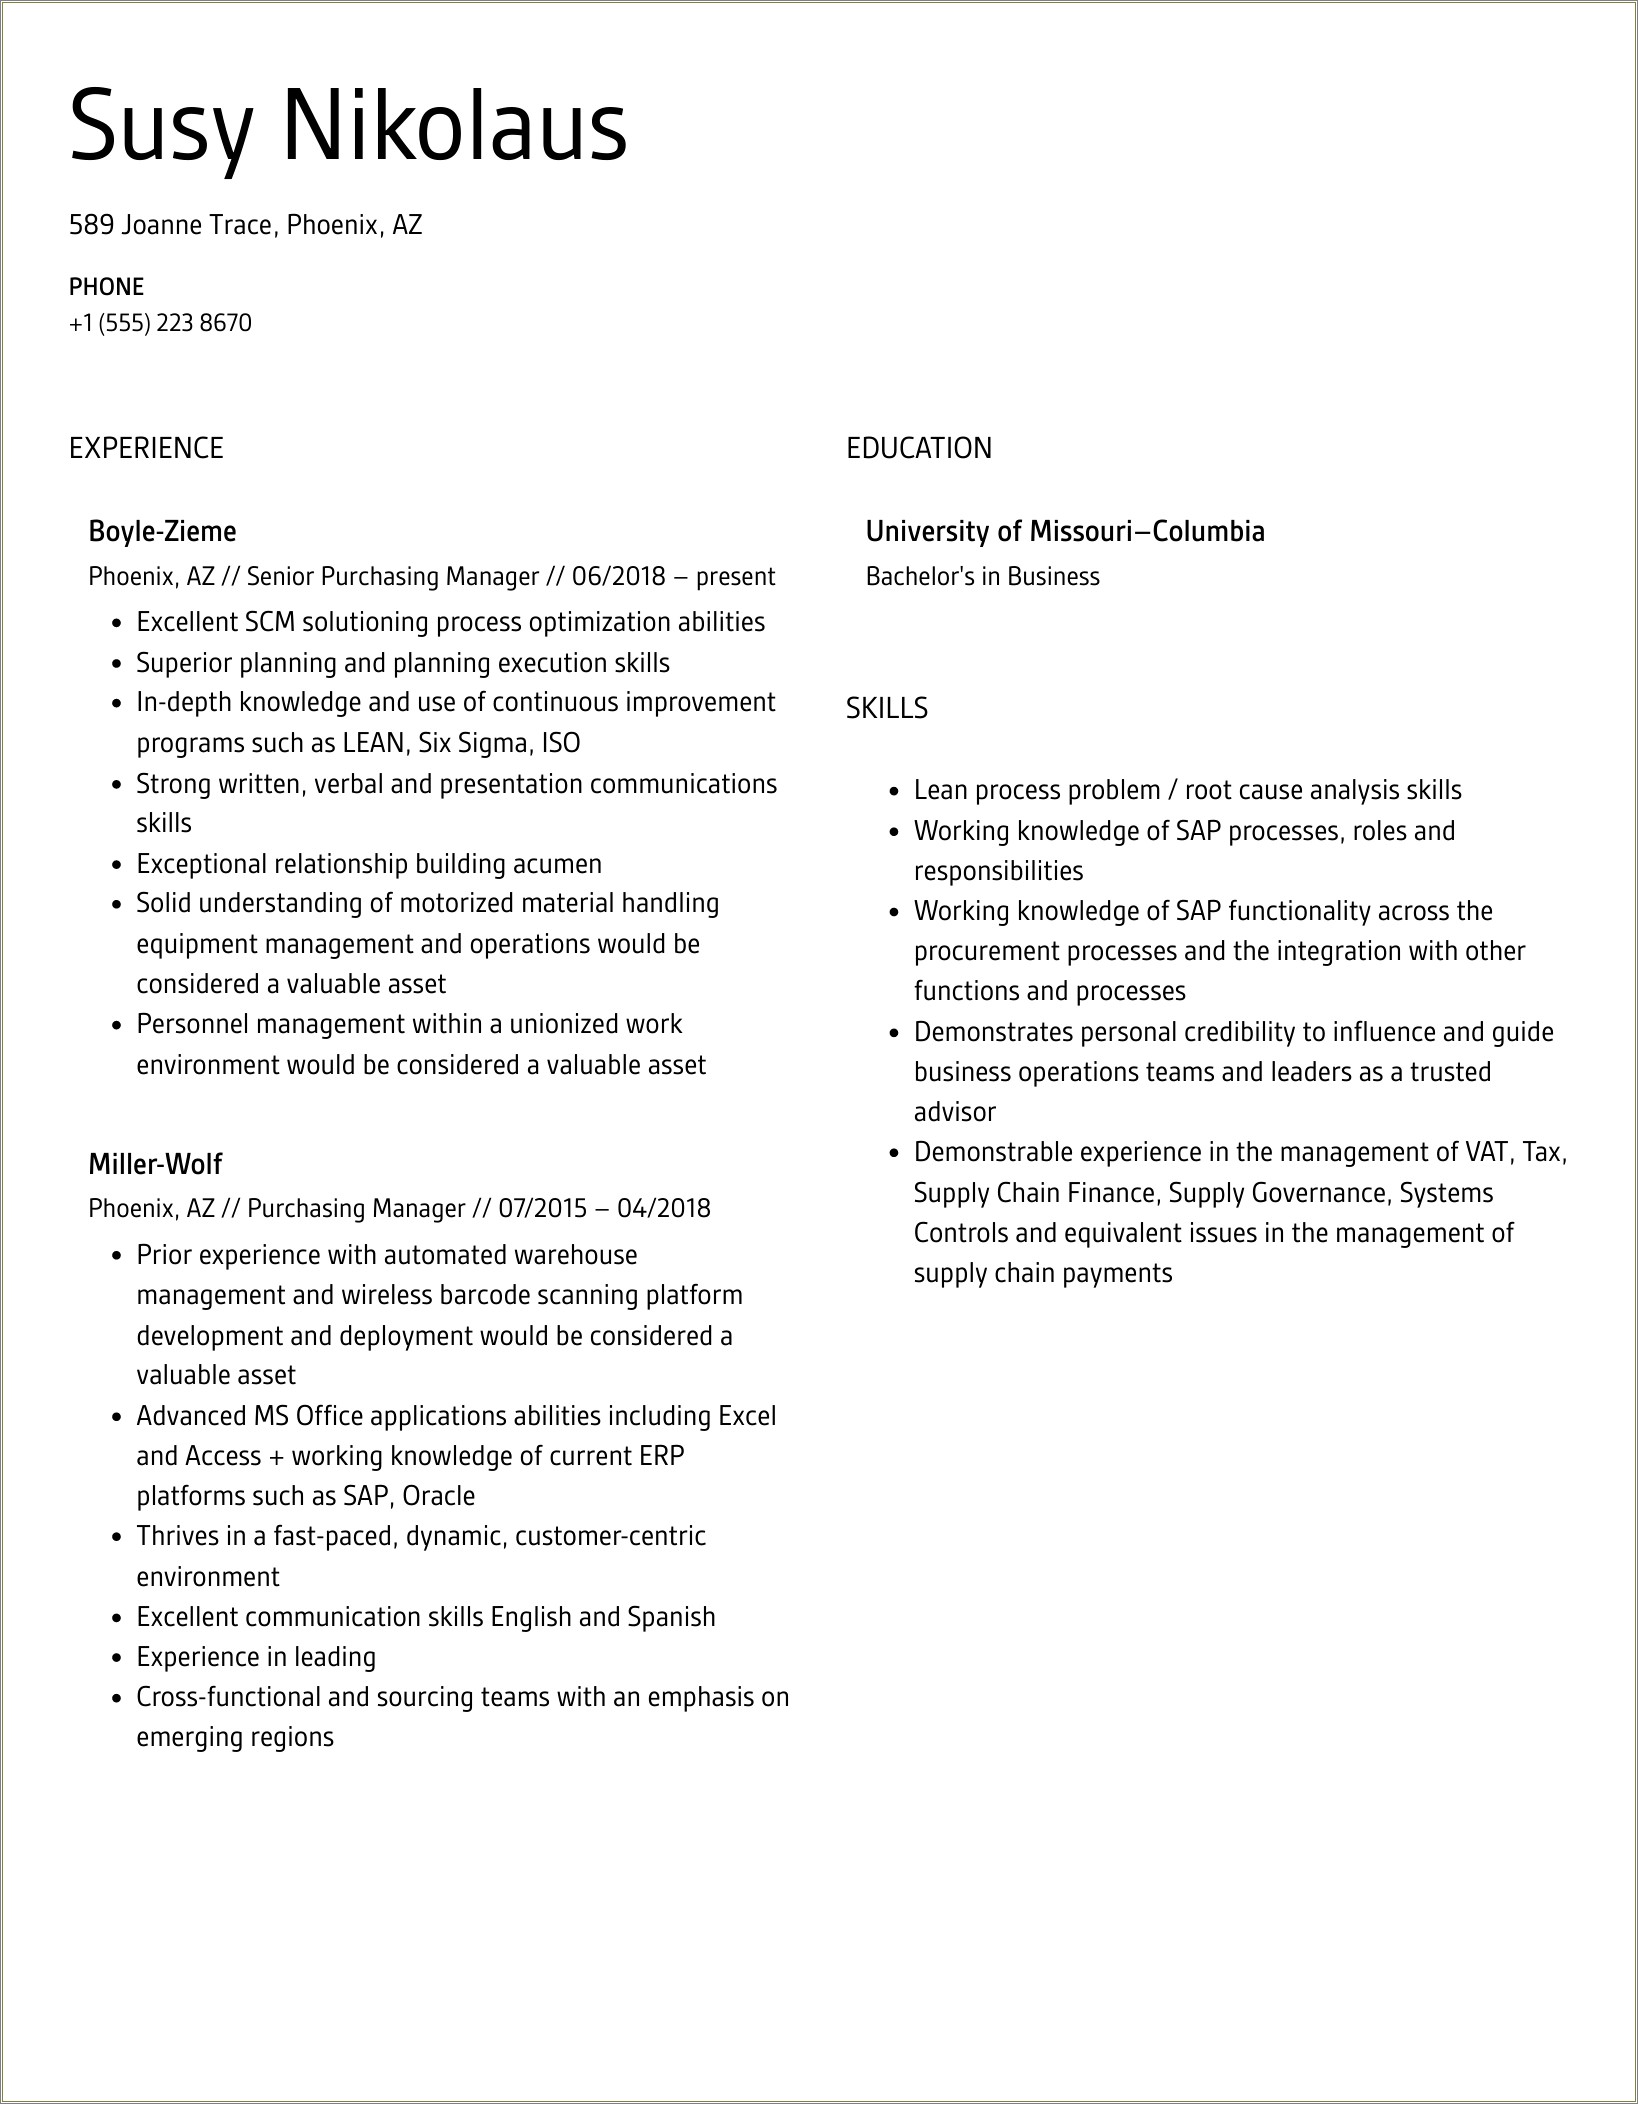 Resume Summary Example For Purchasing Manager